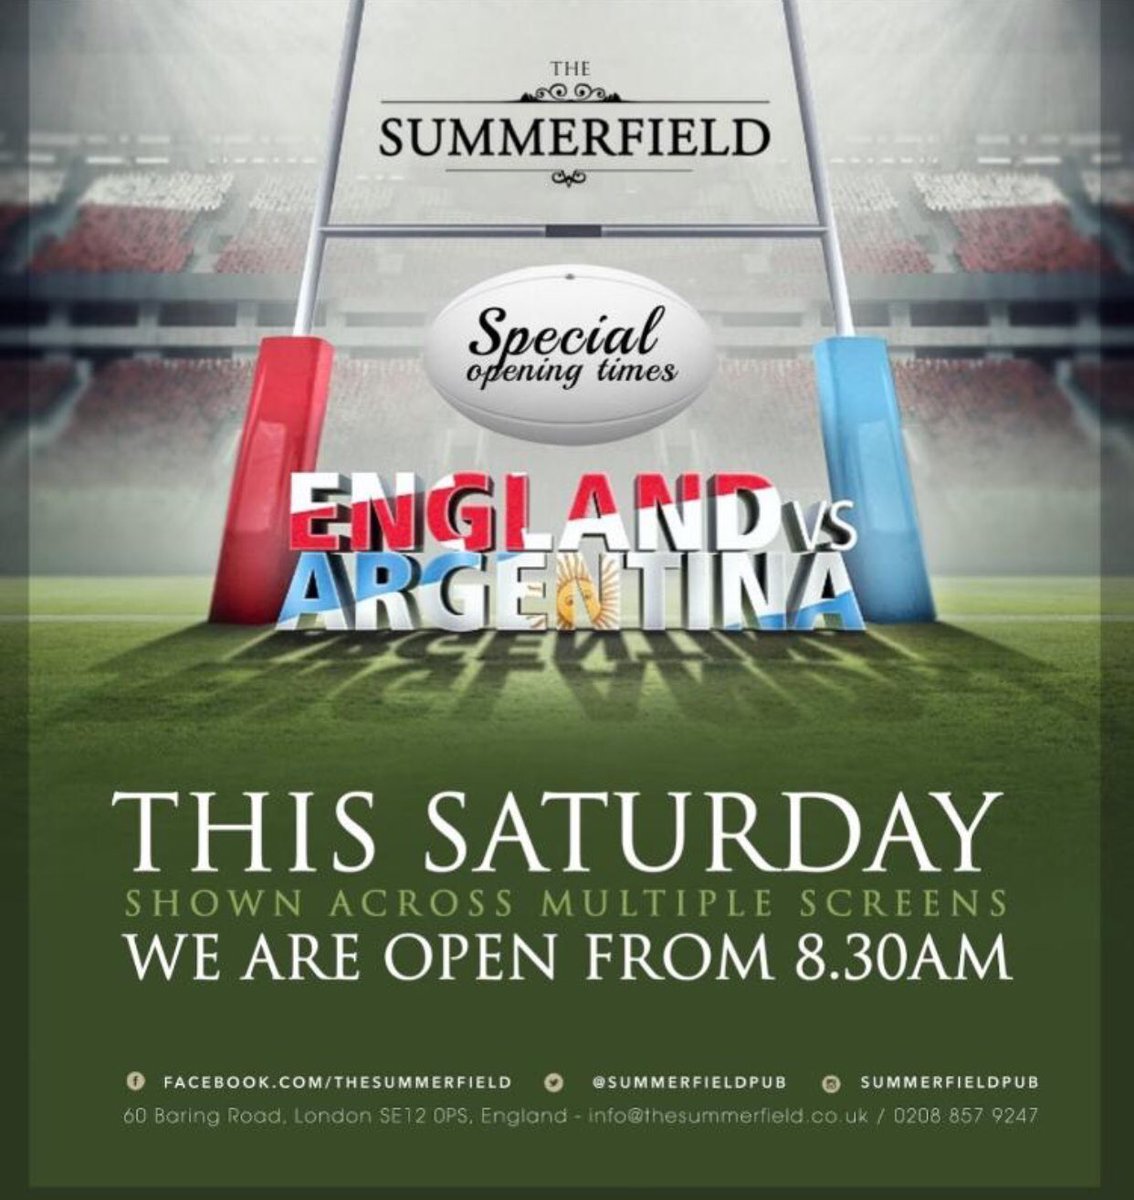 As we get to the business end of the Rugby World Cup pool stages, join us at the Summerfield for England’s next crucial match.